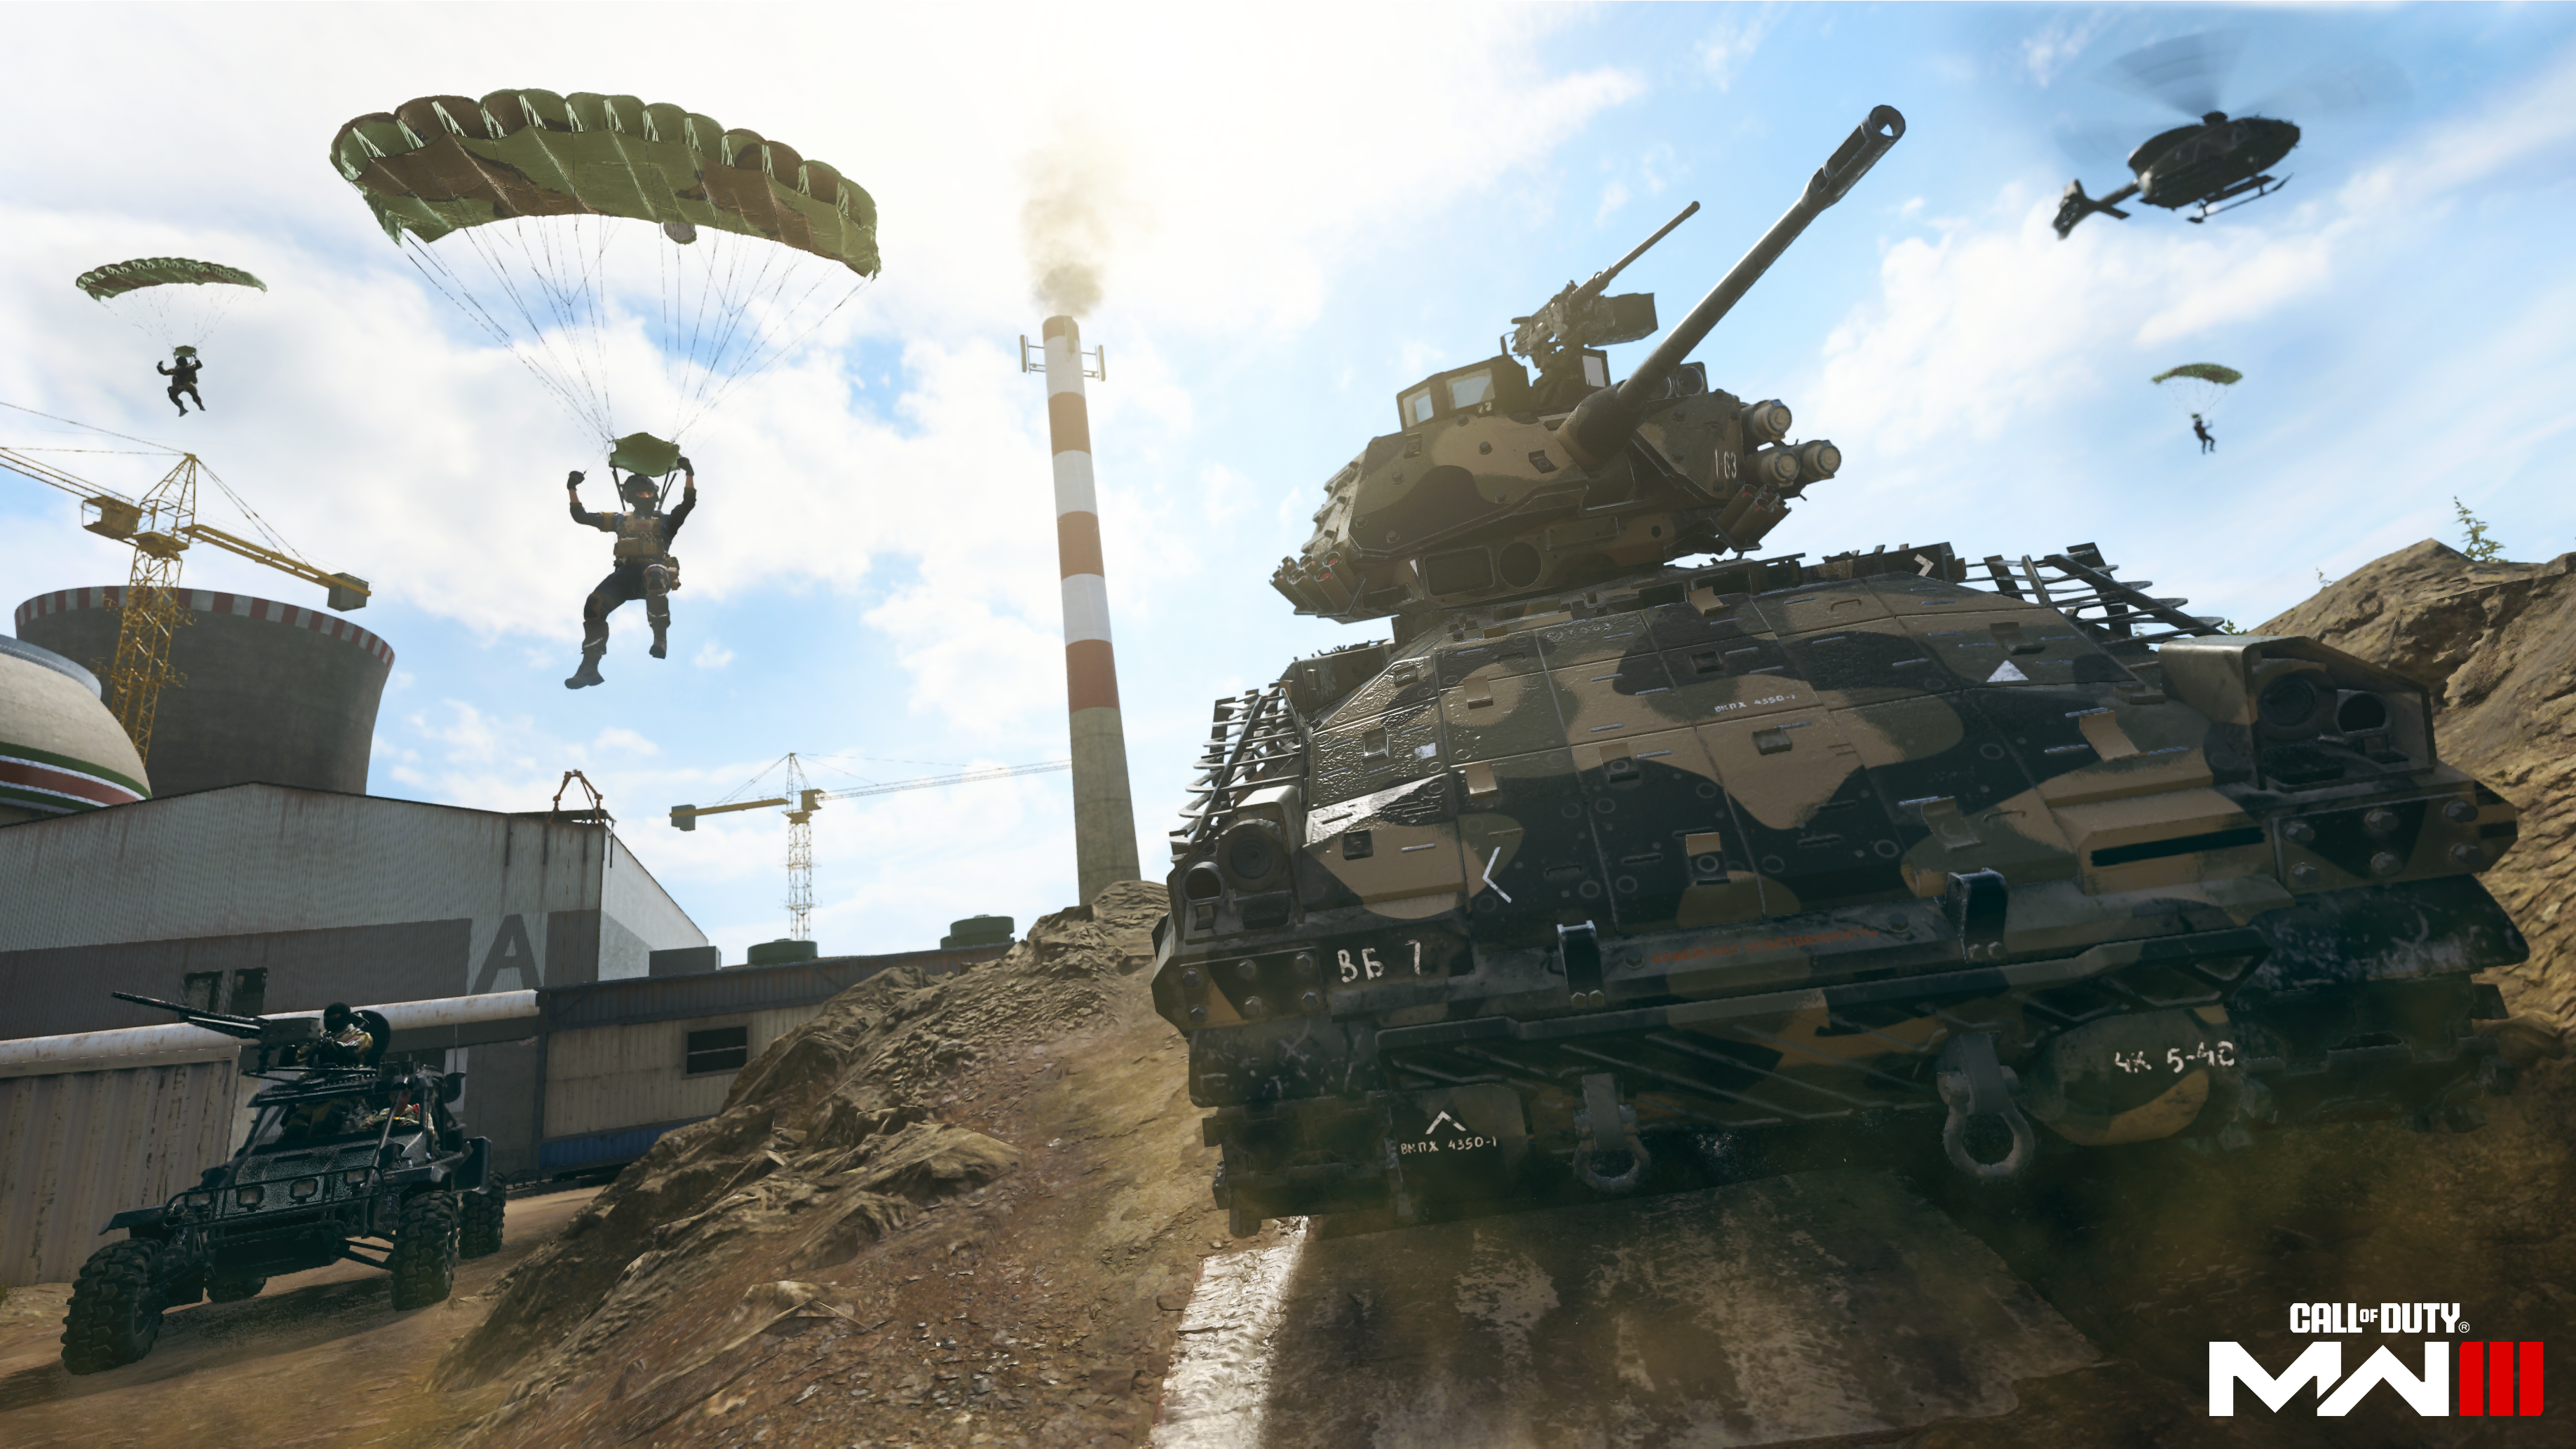 An operator parachuting next to a tank in MW3.